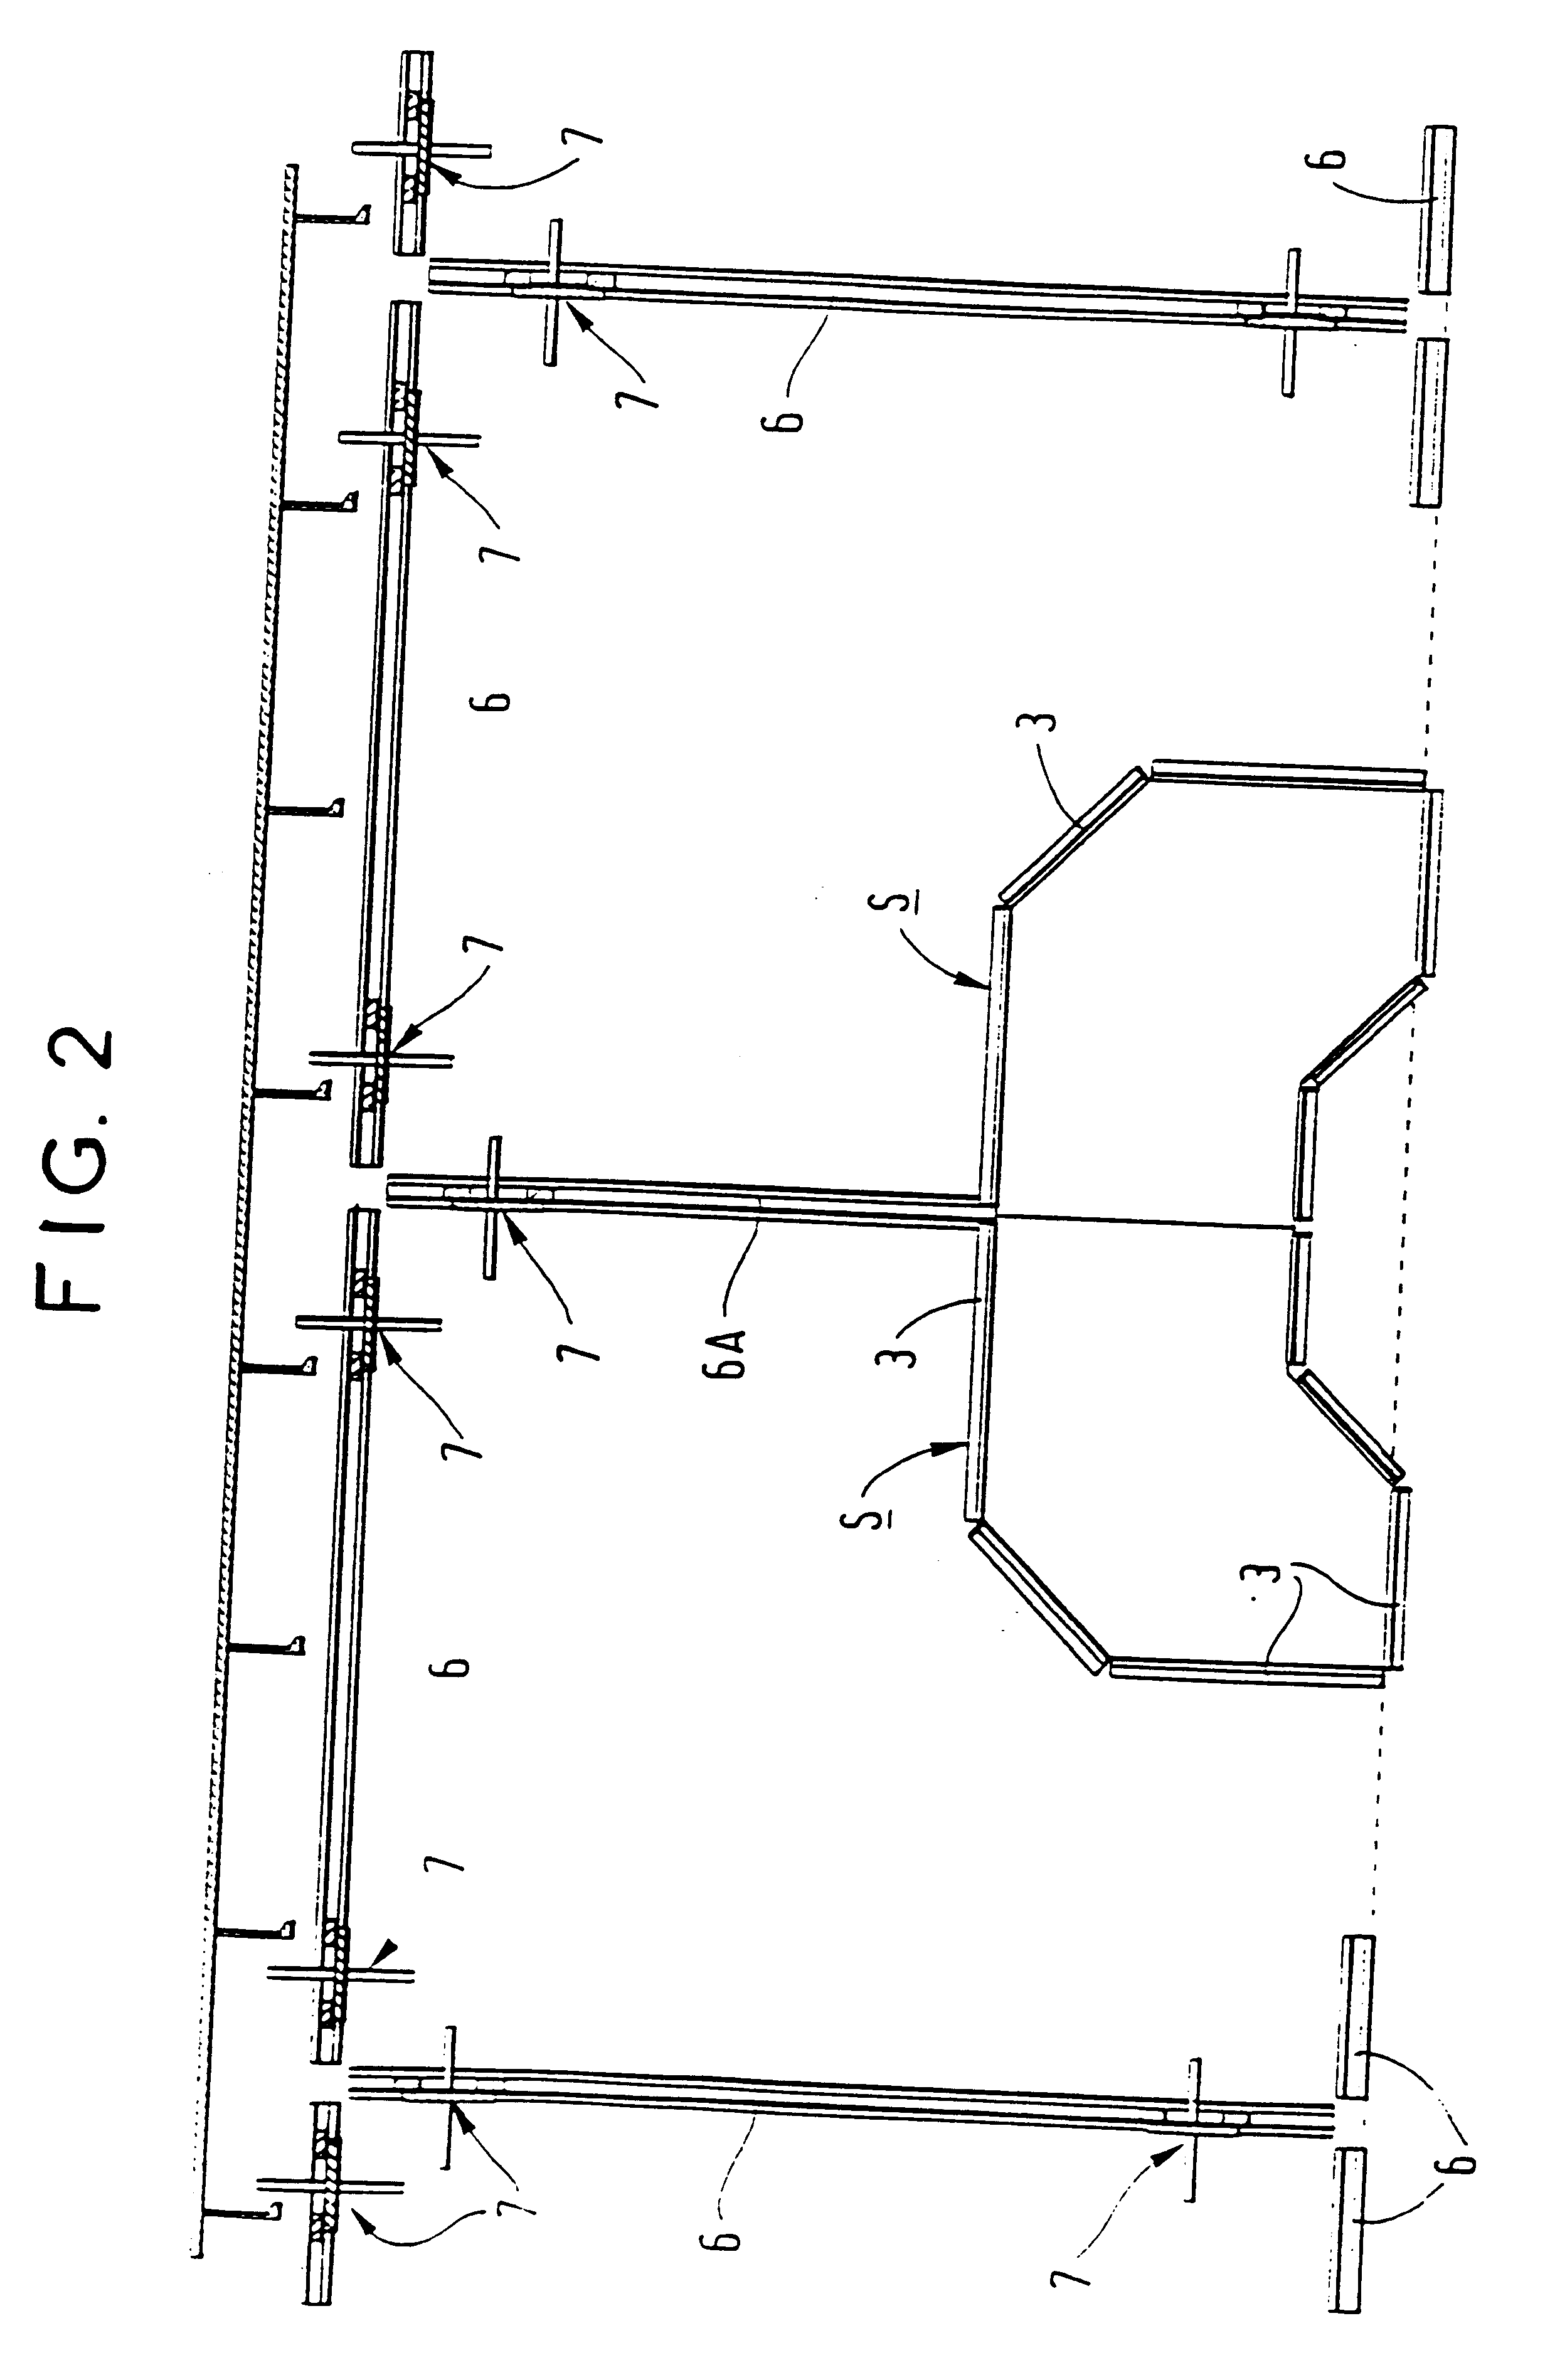 Method of installing ships cabin wall panels and a support for use in the method